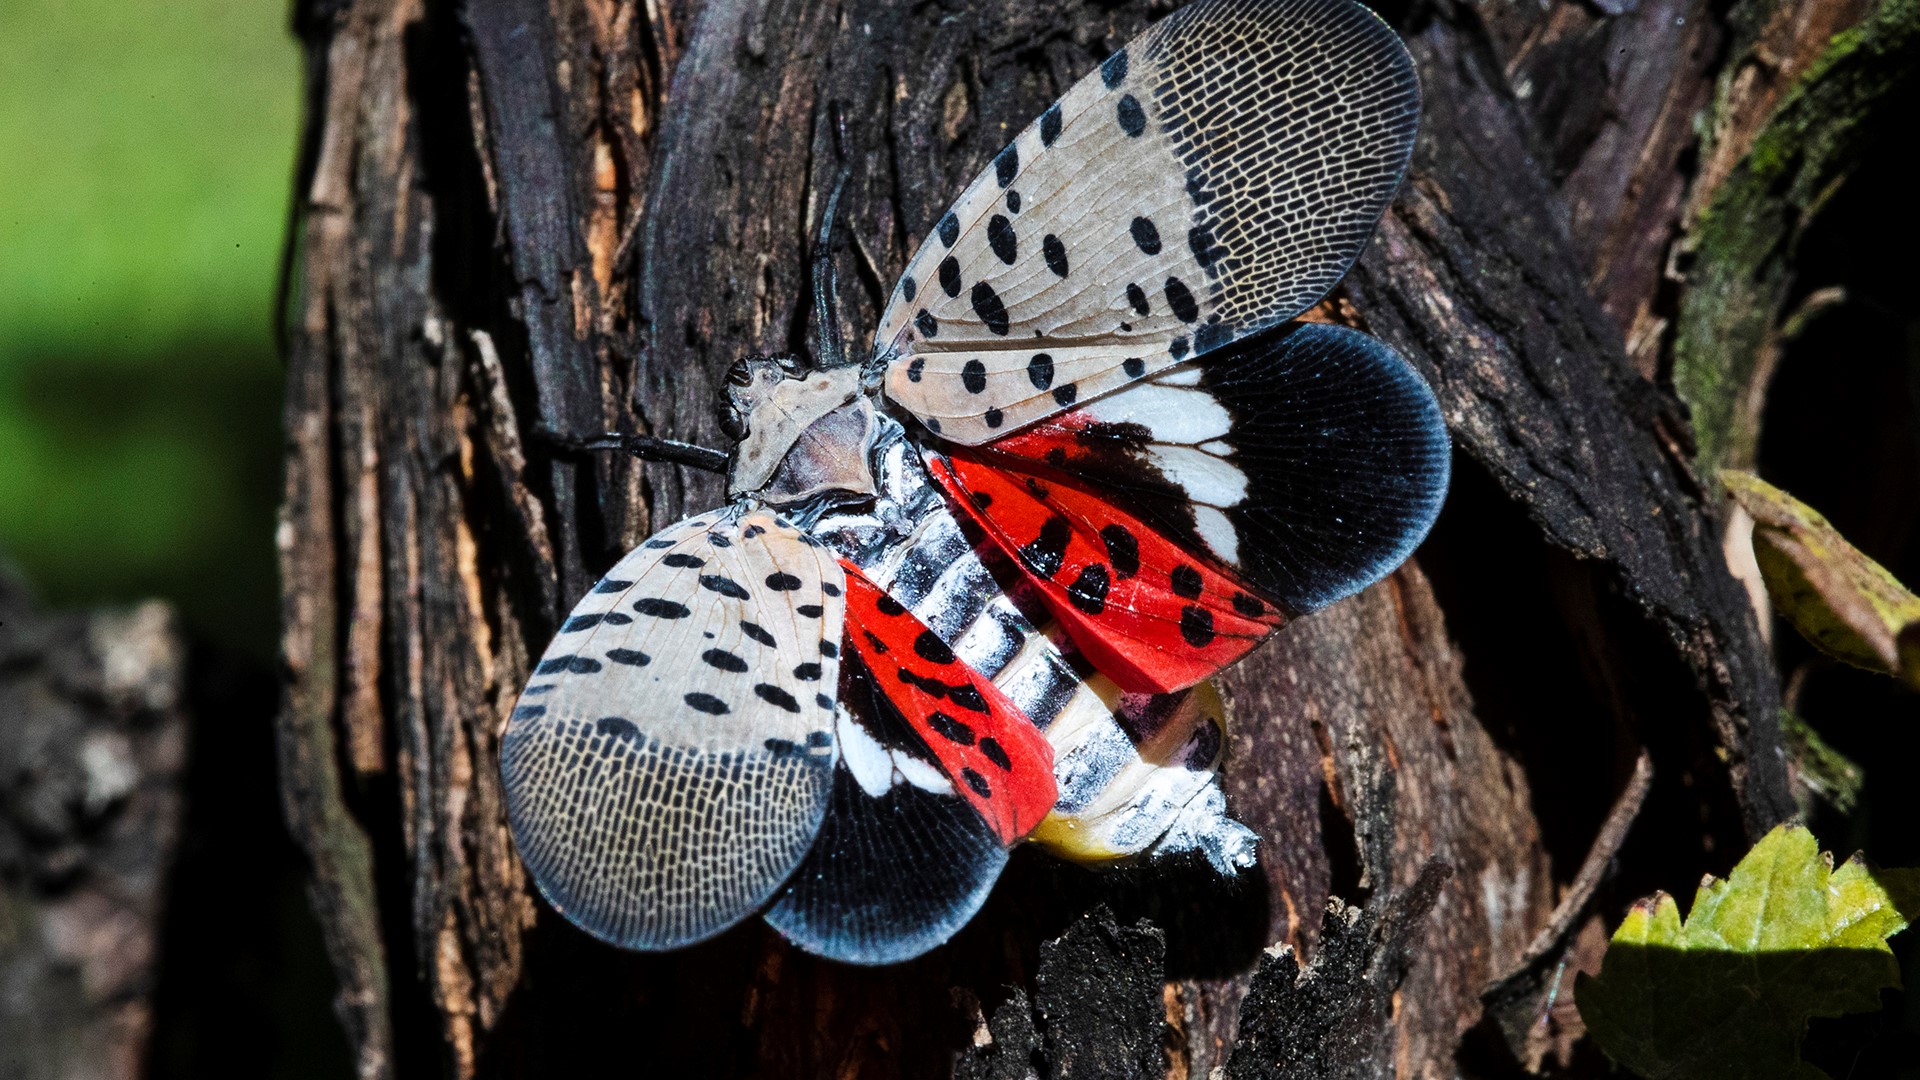 The spotted lanternfly has emerged as a serious pest since the federal government confirmed its arrival in southeastern Pennsylvania 5 years ago. (AP)